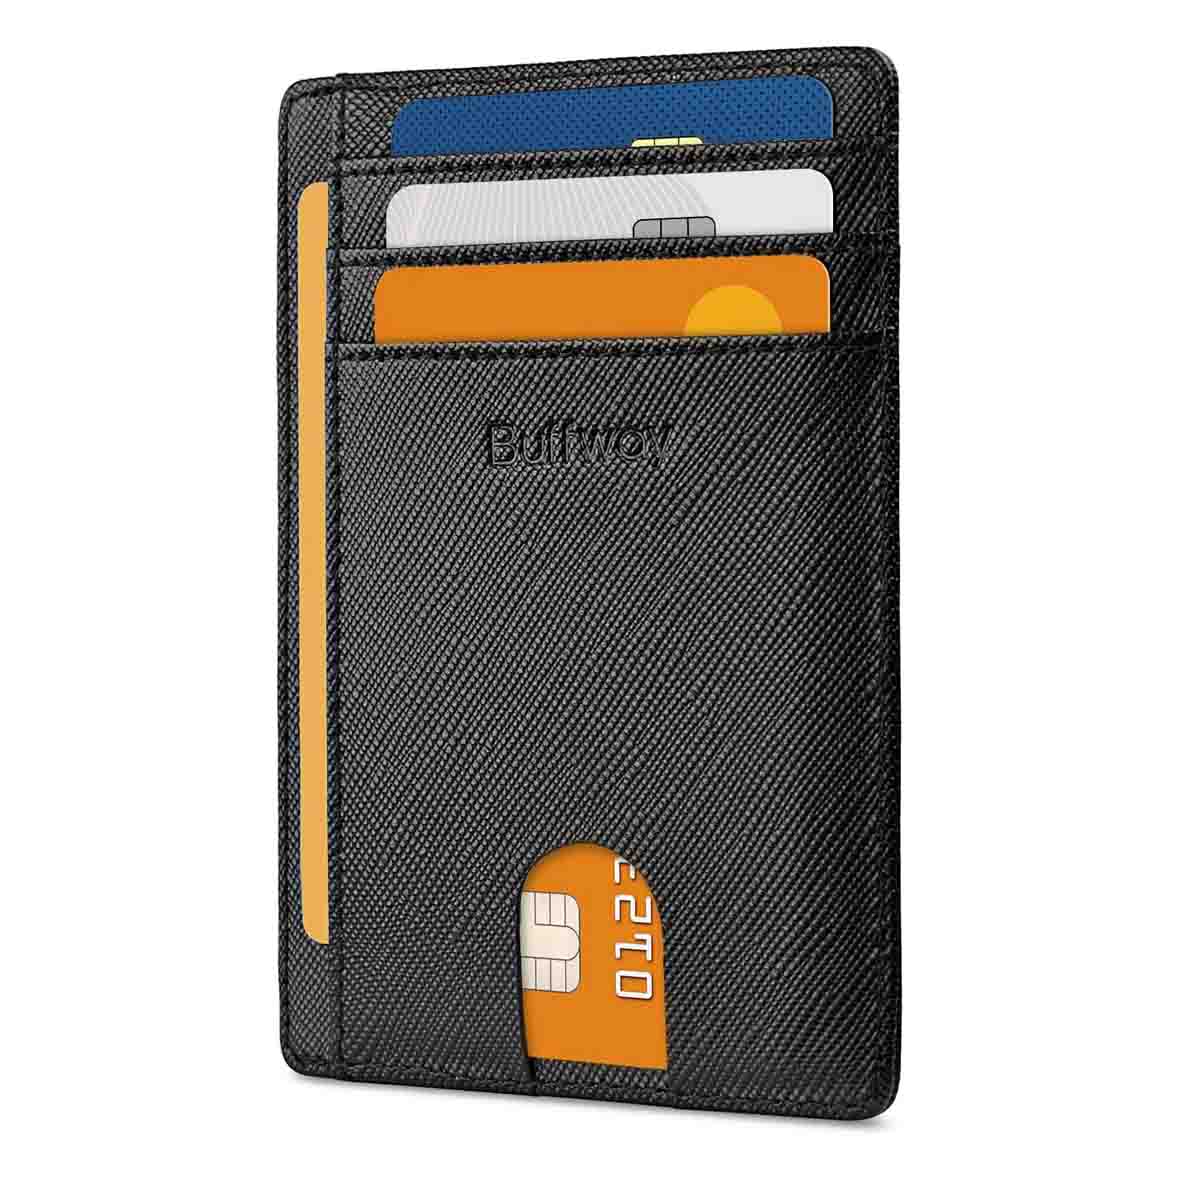 Buffway Slim Minimalist Front Pocket RFID Blocking Leather Wallet with card holders